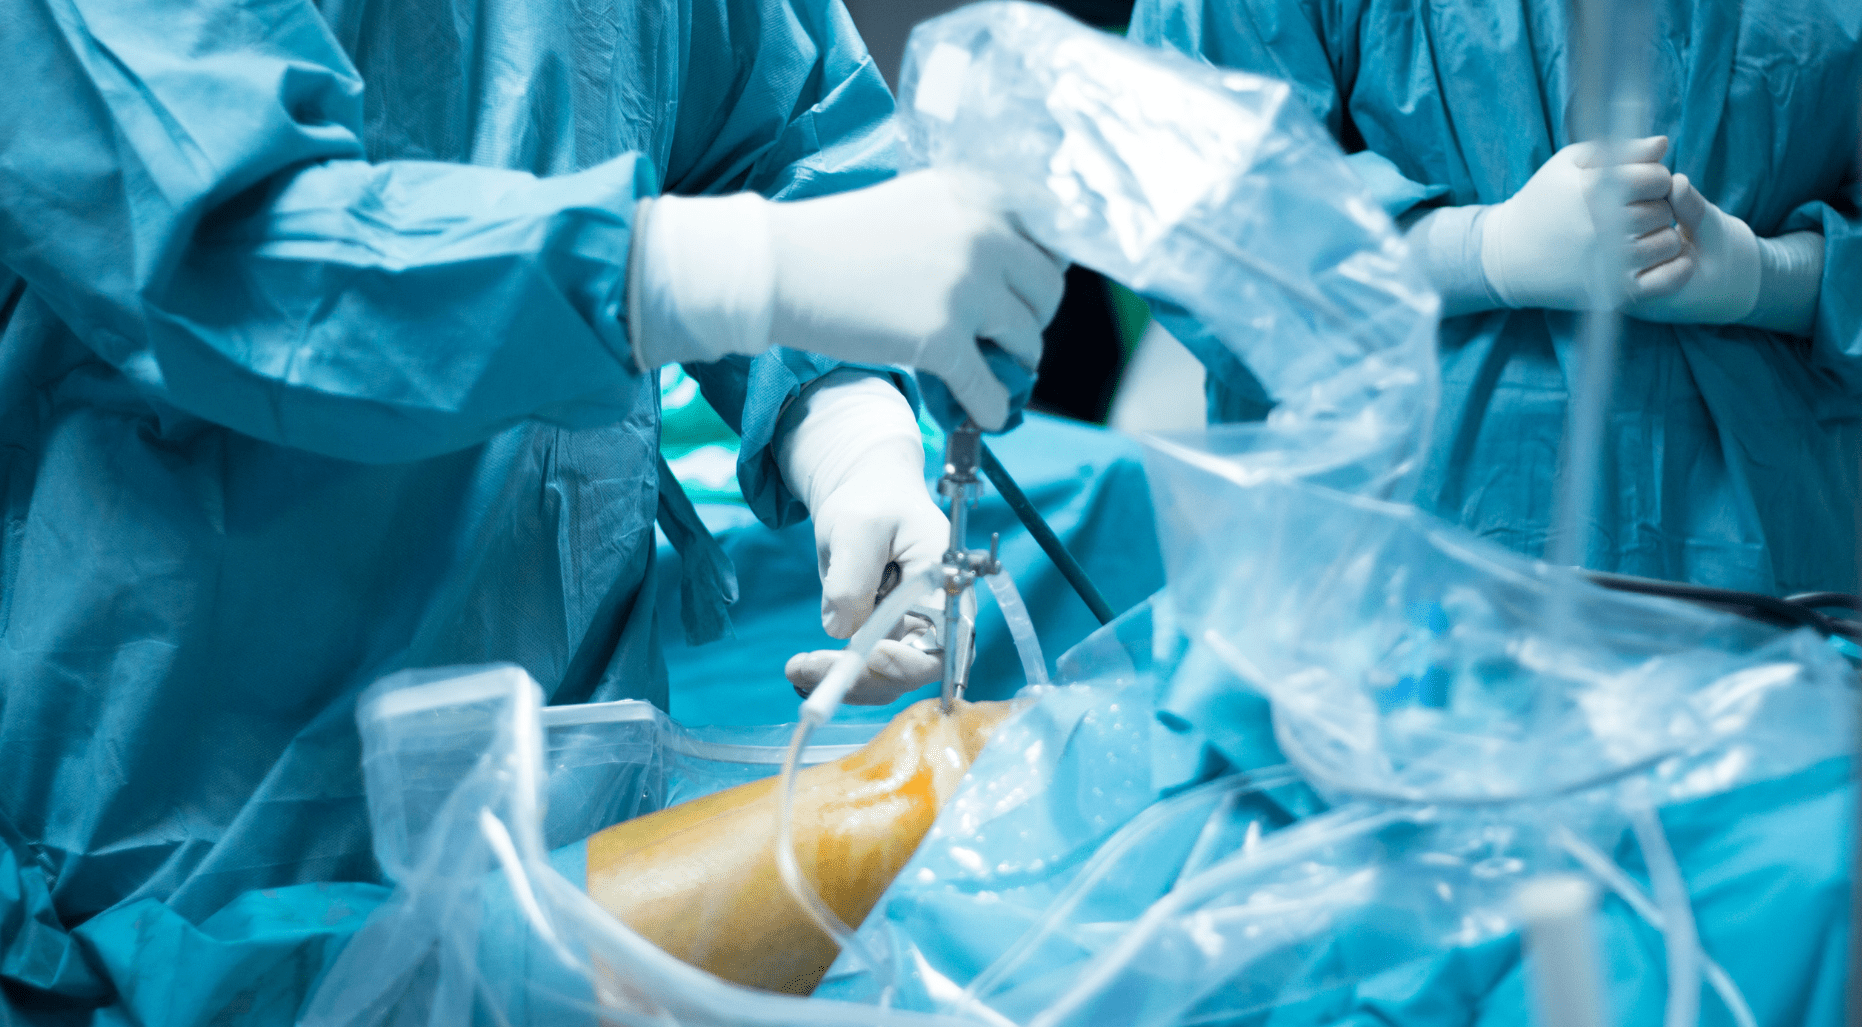 Global Orthopedic Regenerative Surgical Products Market Size, Forecasts, And Opportunities – Includes Orthopedic Regenerative Surgical Products Market Share